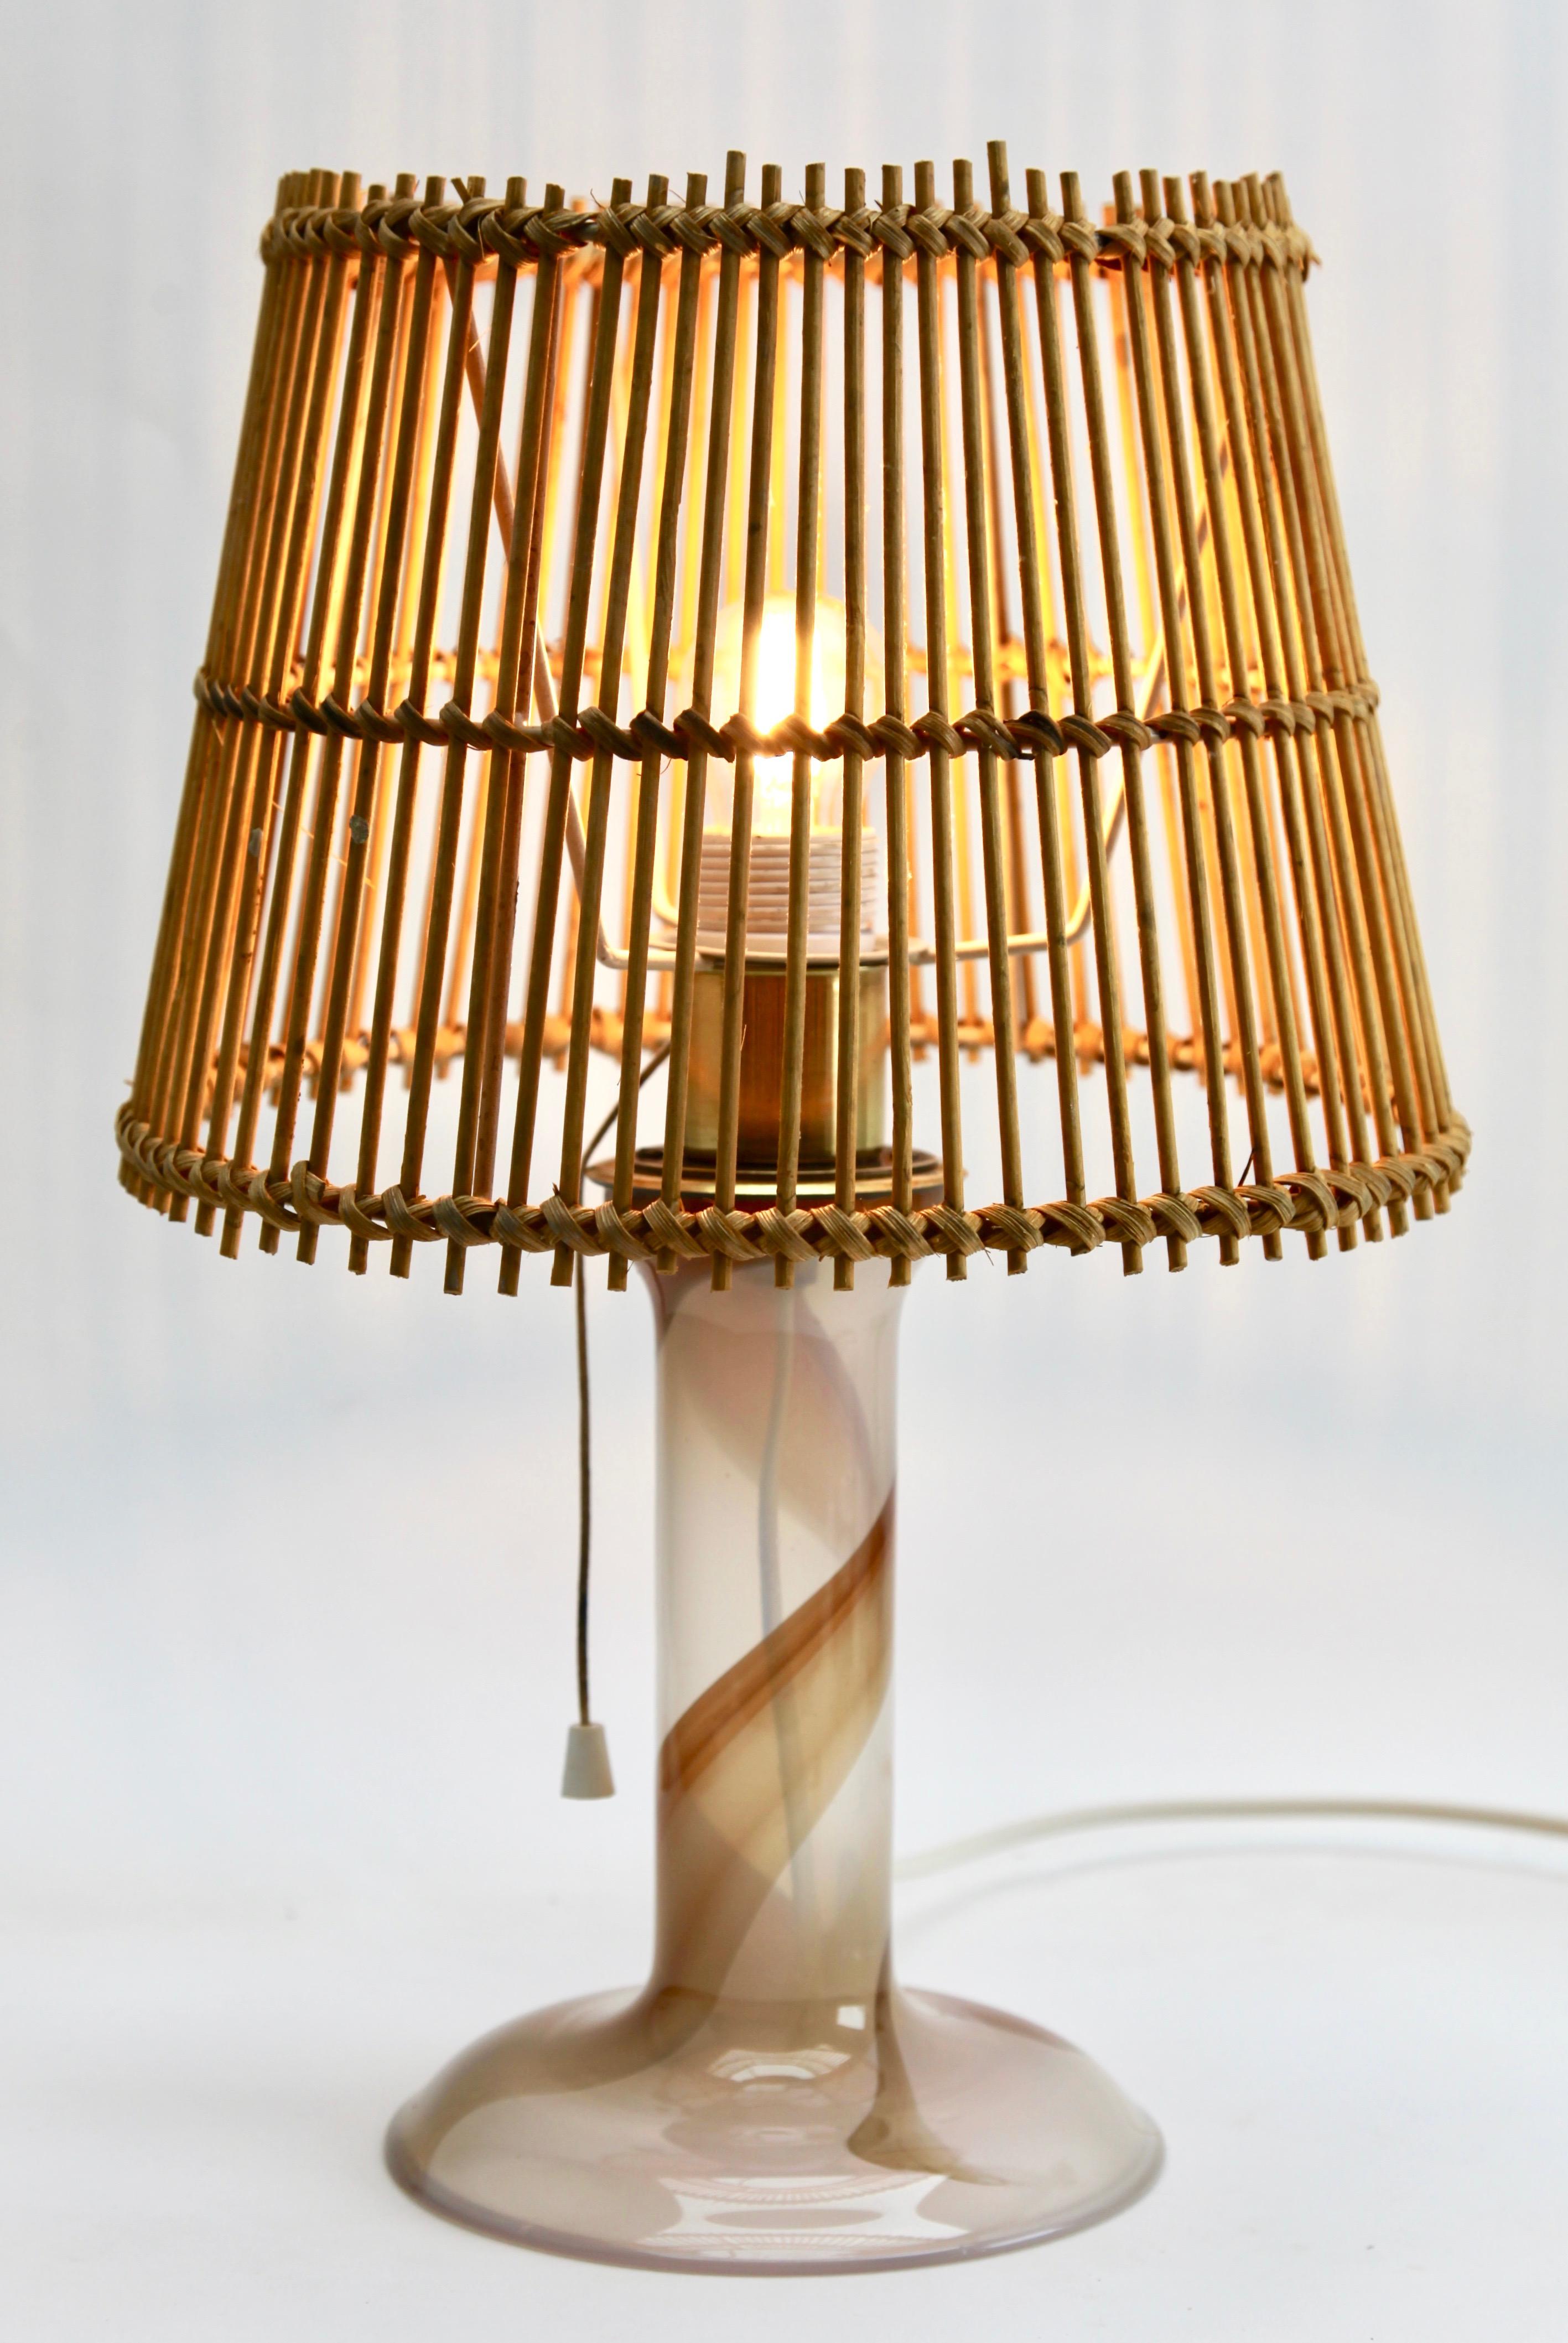 This restrained modern table lamp designed by Hannelore Dreutler at the Lyktan Studio has a semi opaque glass body with a sandy pink hue, incorporating a spiral ribbon rising up the stem, and a flared base to provide stability. 
Made by the